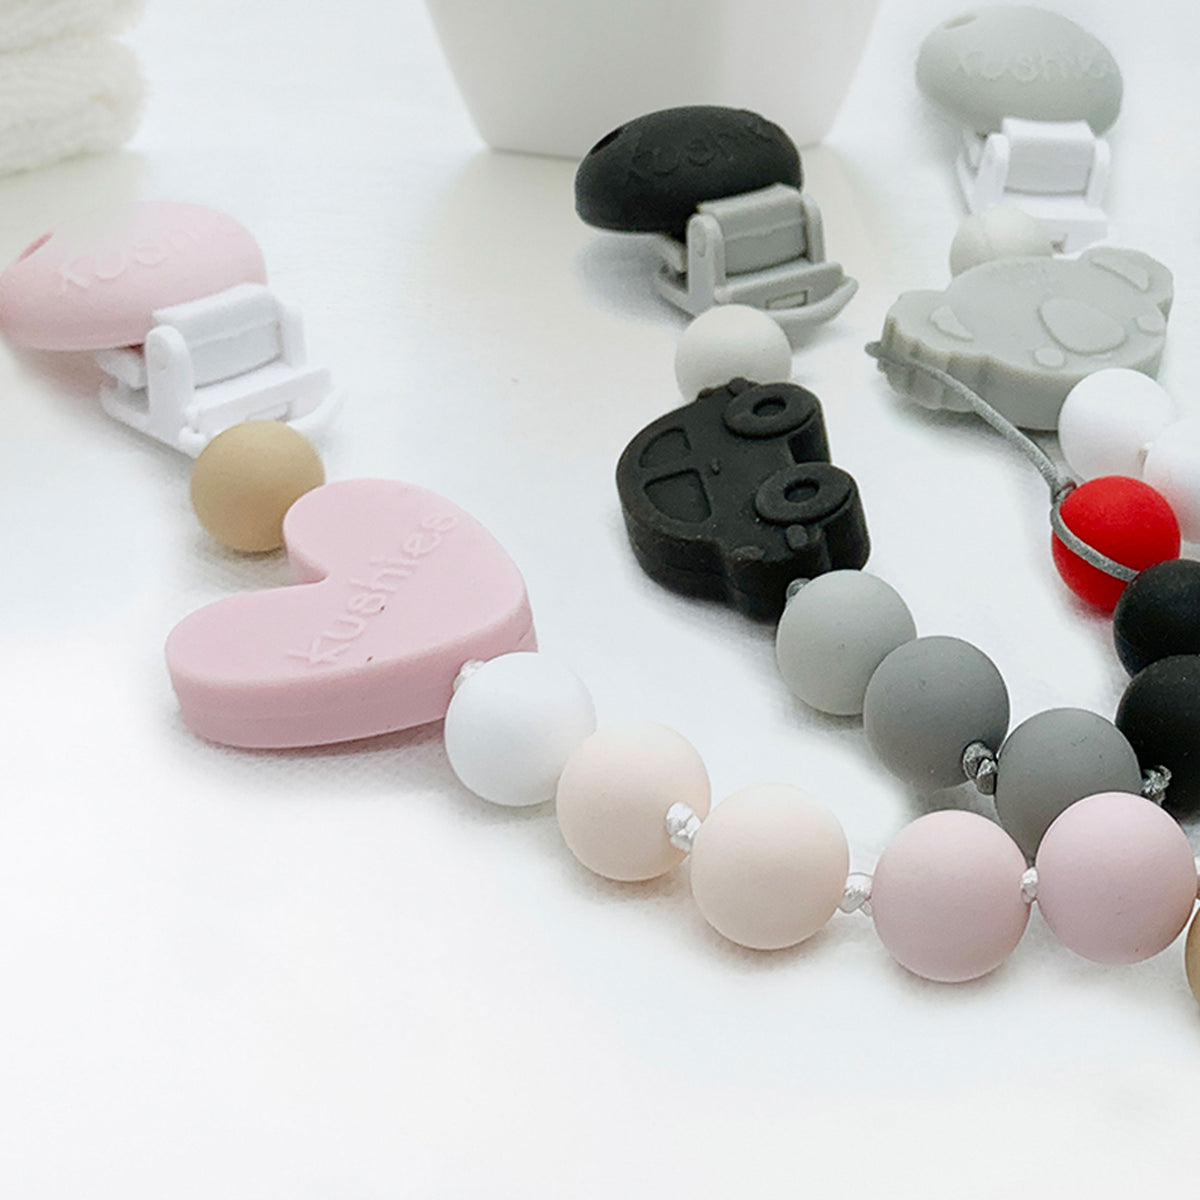 pink heart black car and grey koala pacifier clips on table